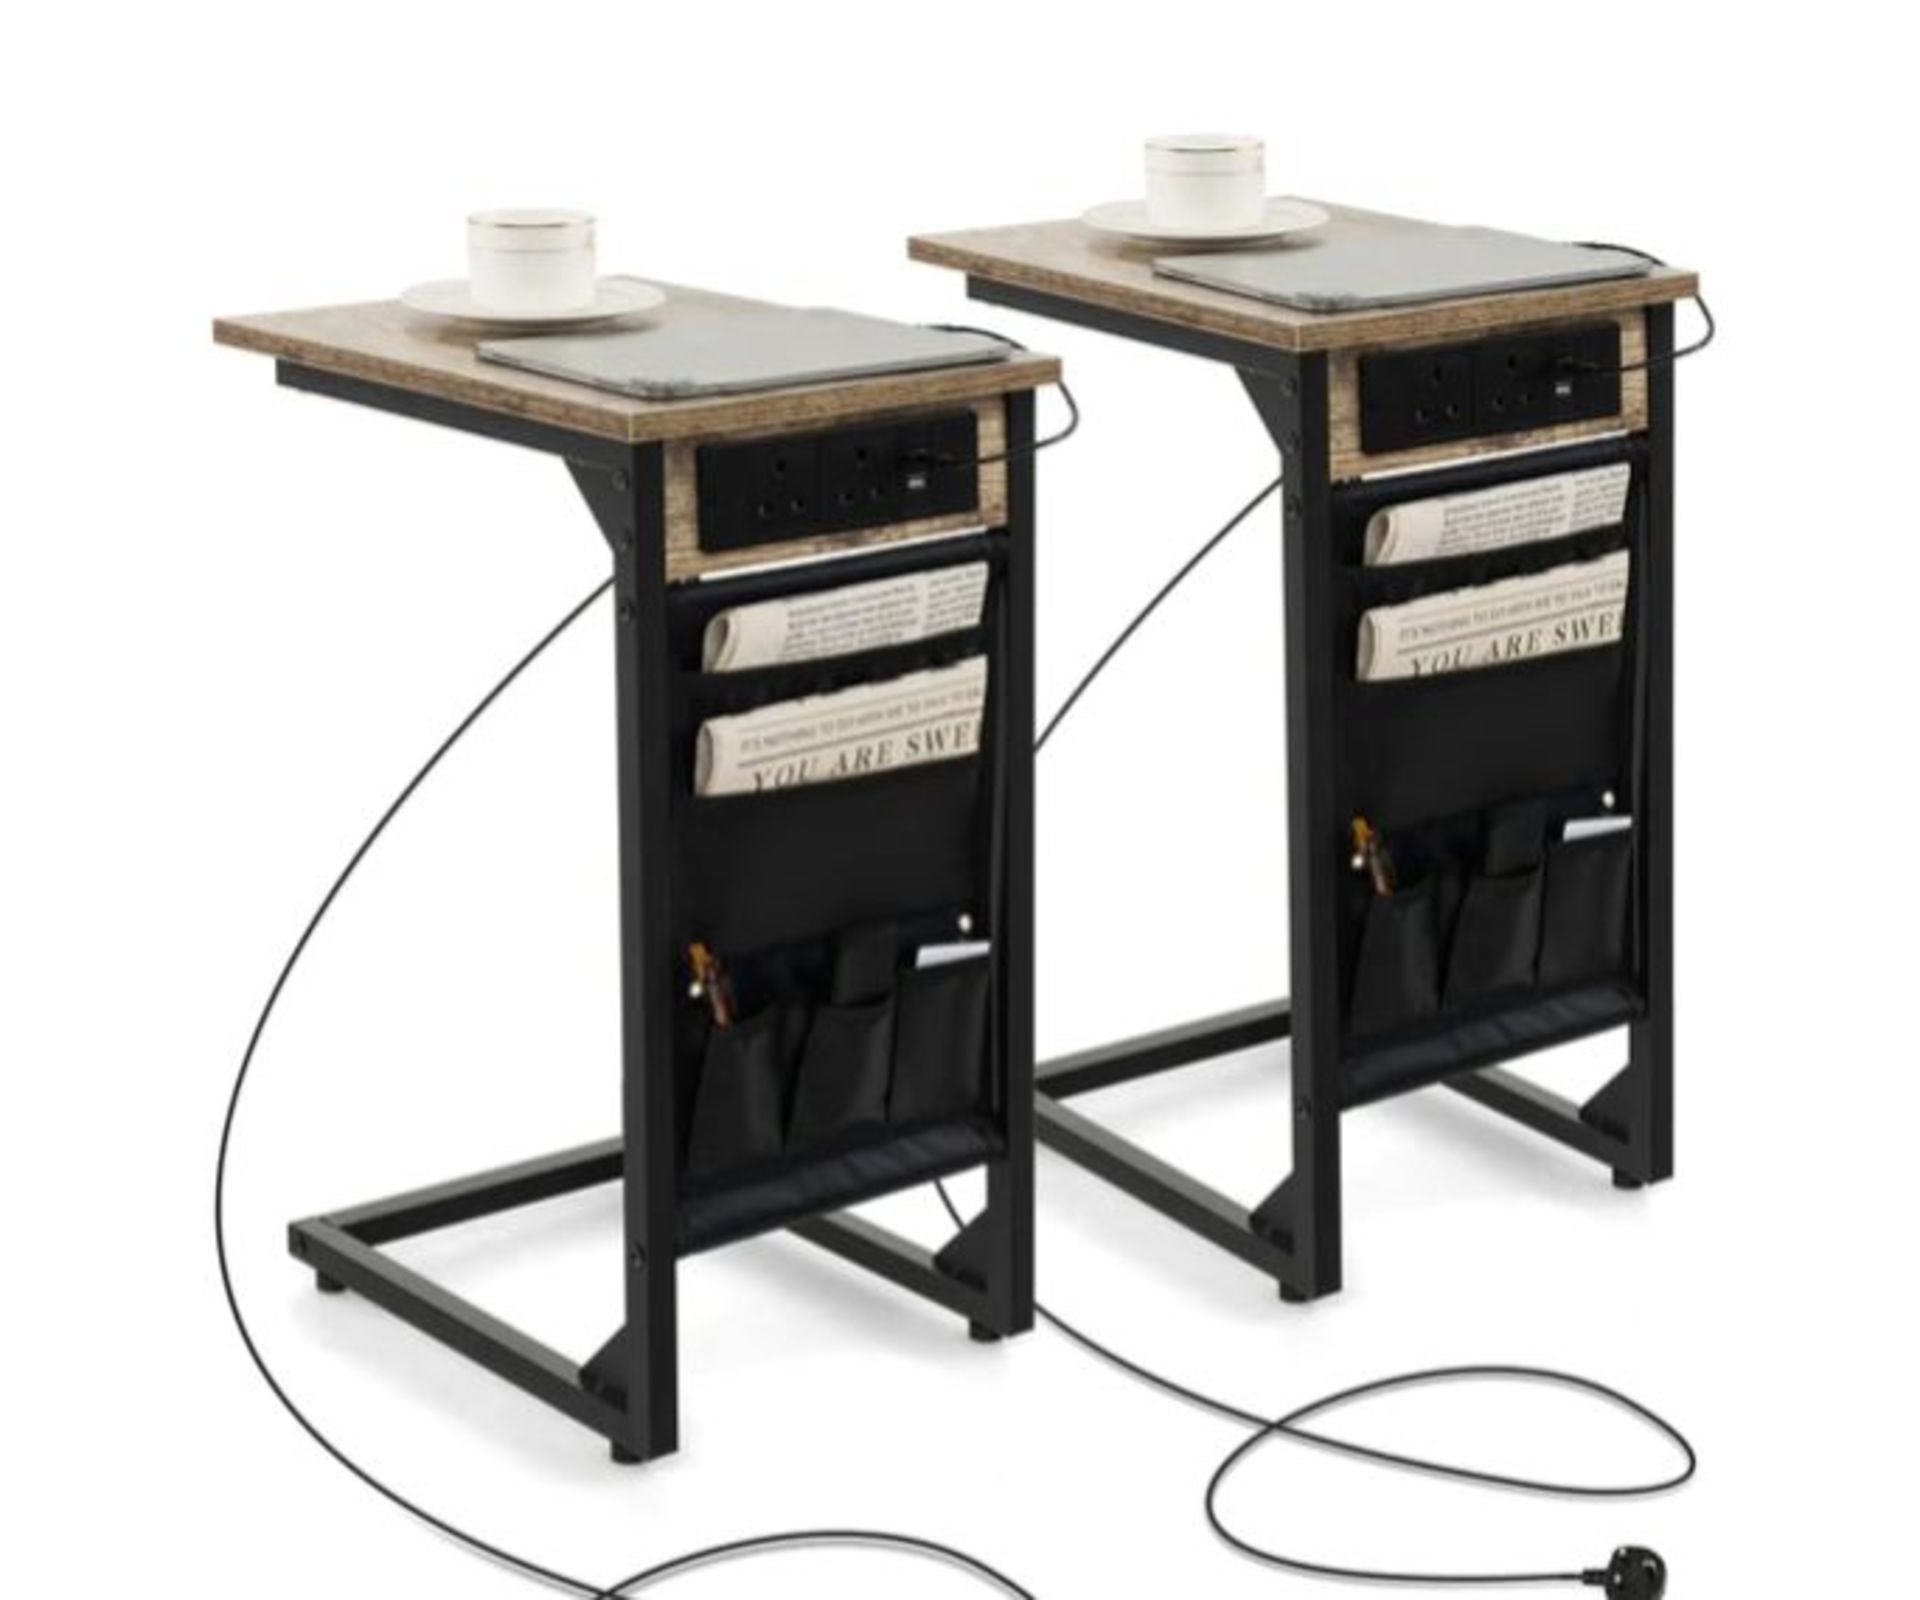 SET OF 2 C-SHAPED END TABLE WITH CHARGING STATION AND SIDE STORAGE BAG-RUSTIC BROWN. - ER54.